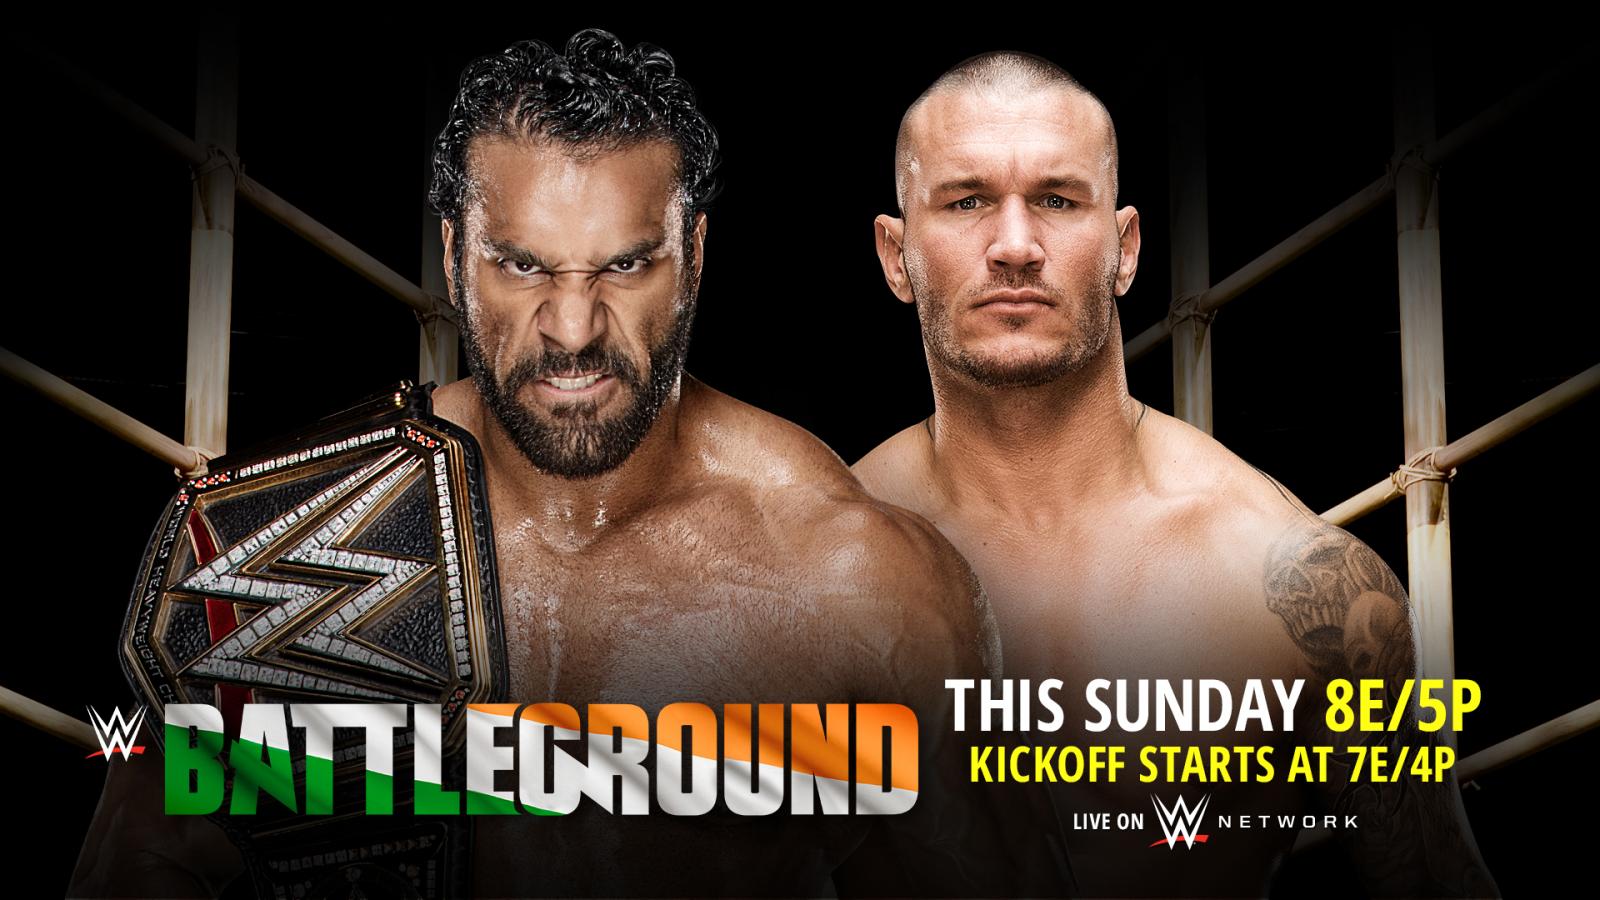 What’s the Next WWE PayPerView After Battleground?